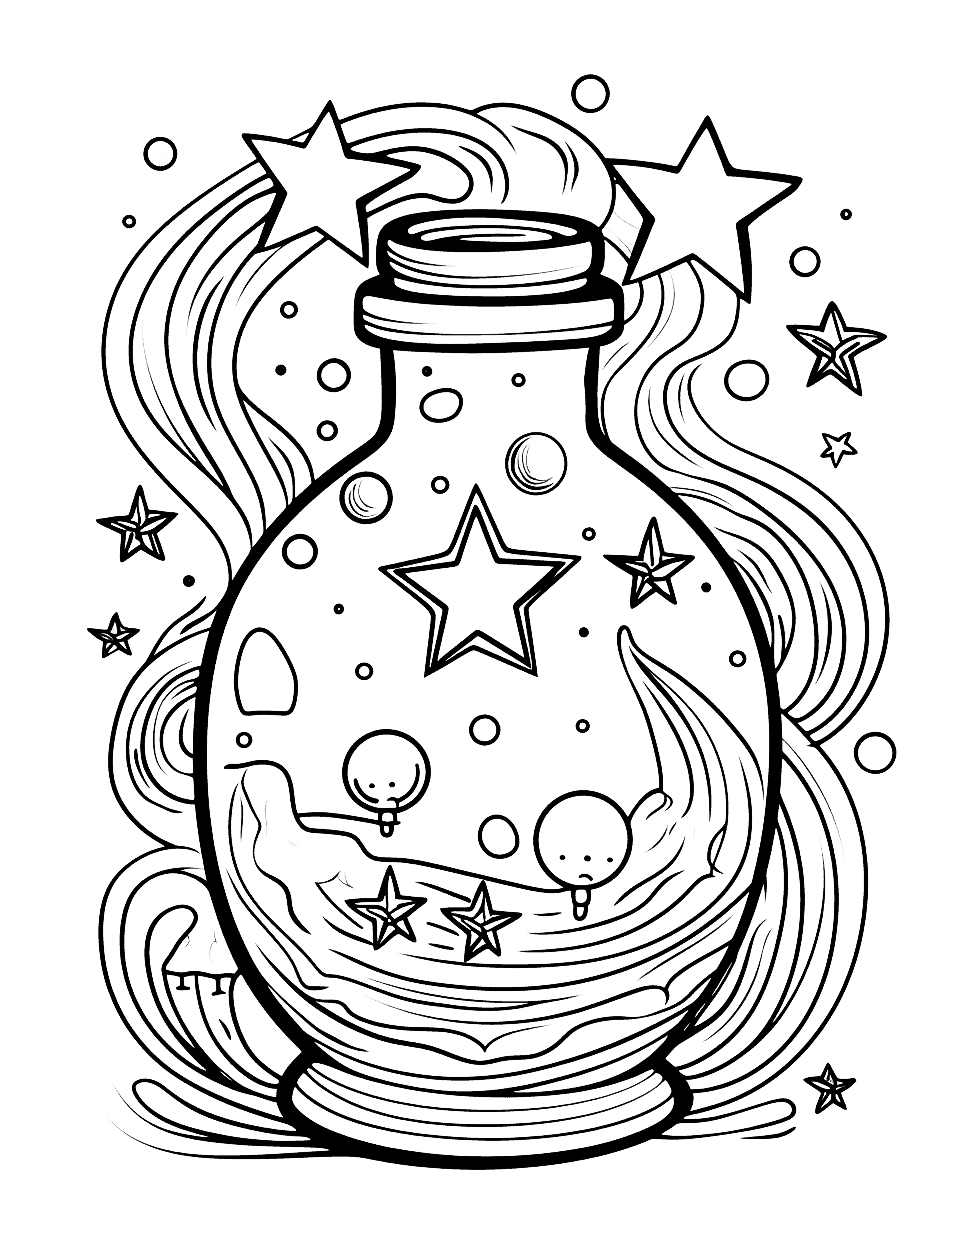 Galaxy in a Bottle Adult Coloring Page - An intricate bottle containing a swirling galaxy surrounded by stars, planets, and comets.